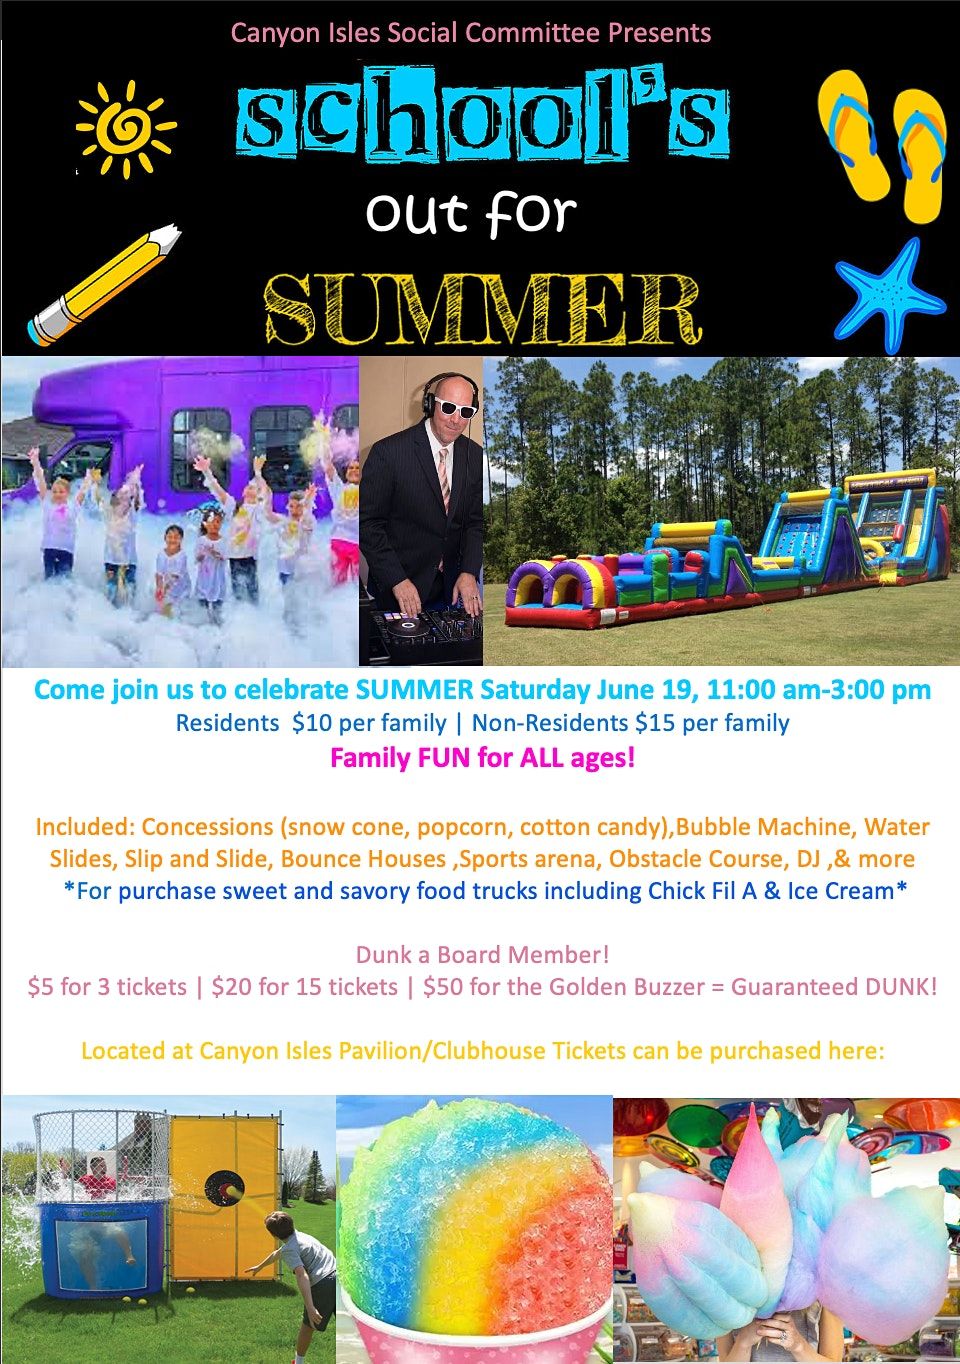 Schools Out for Summer Family Fun Day!